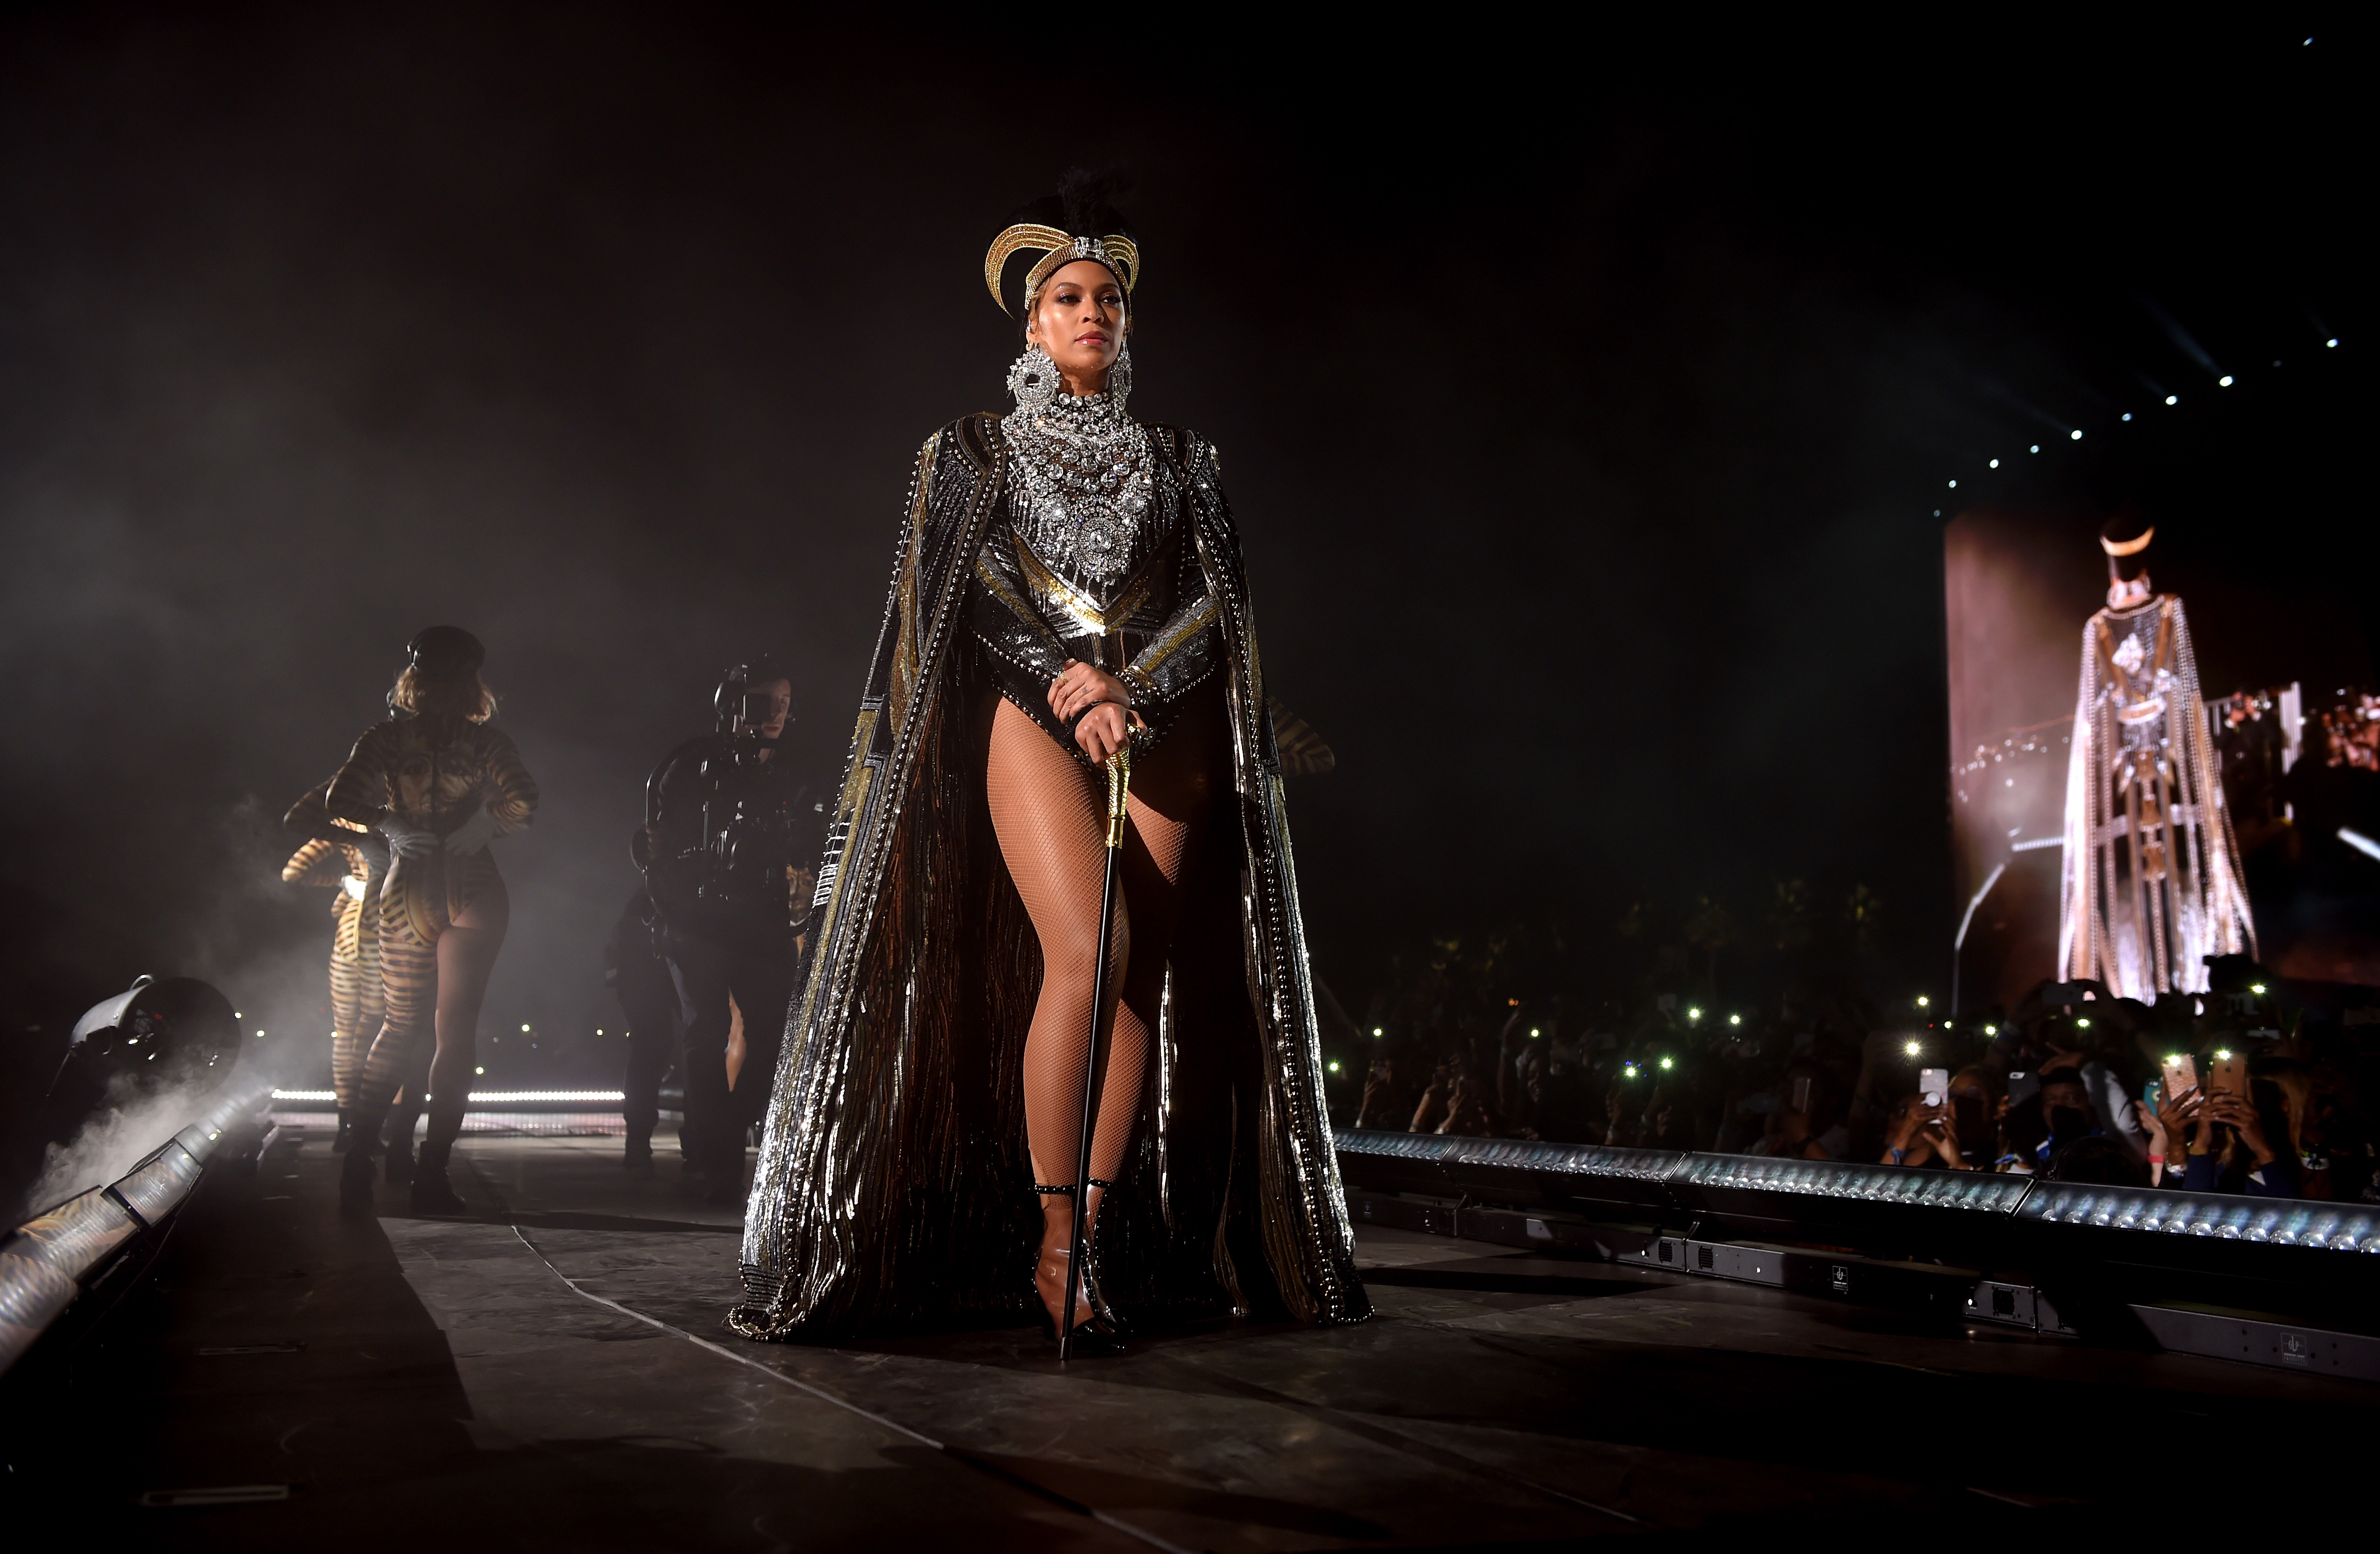 Beyoncé Disses “Desperate, Mediocre, Wack B*tch” During “On The Run II” Concert